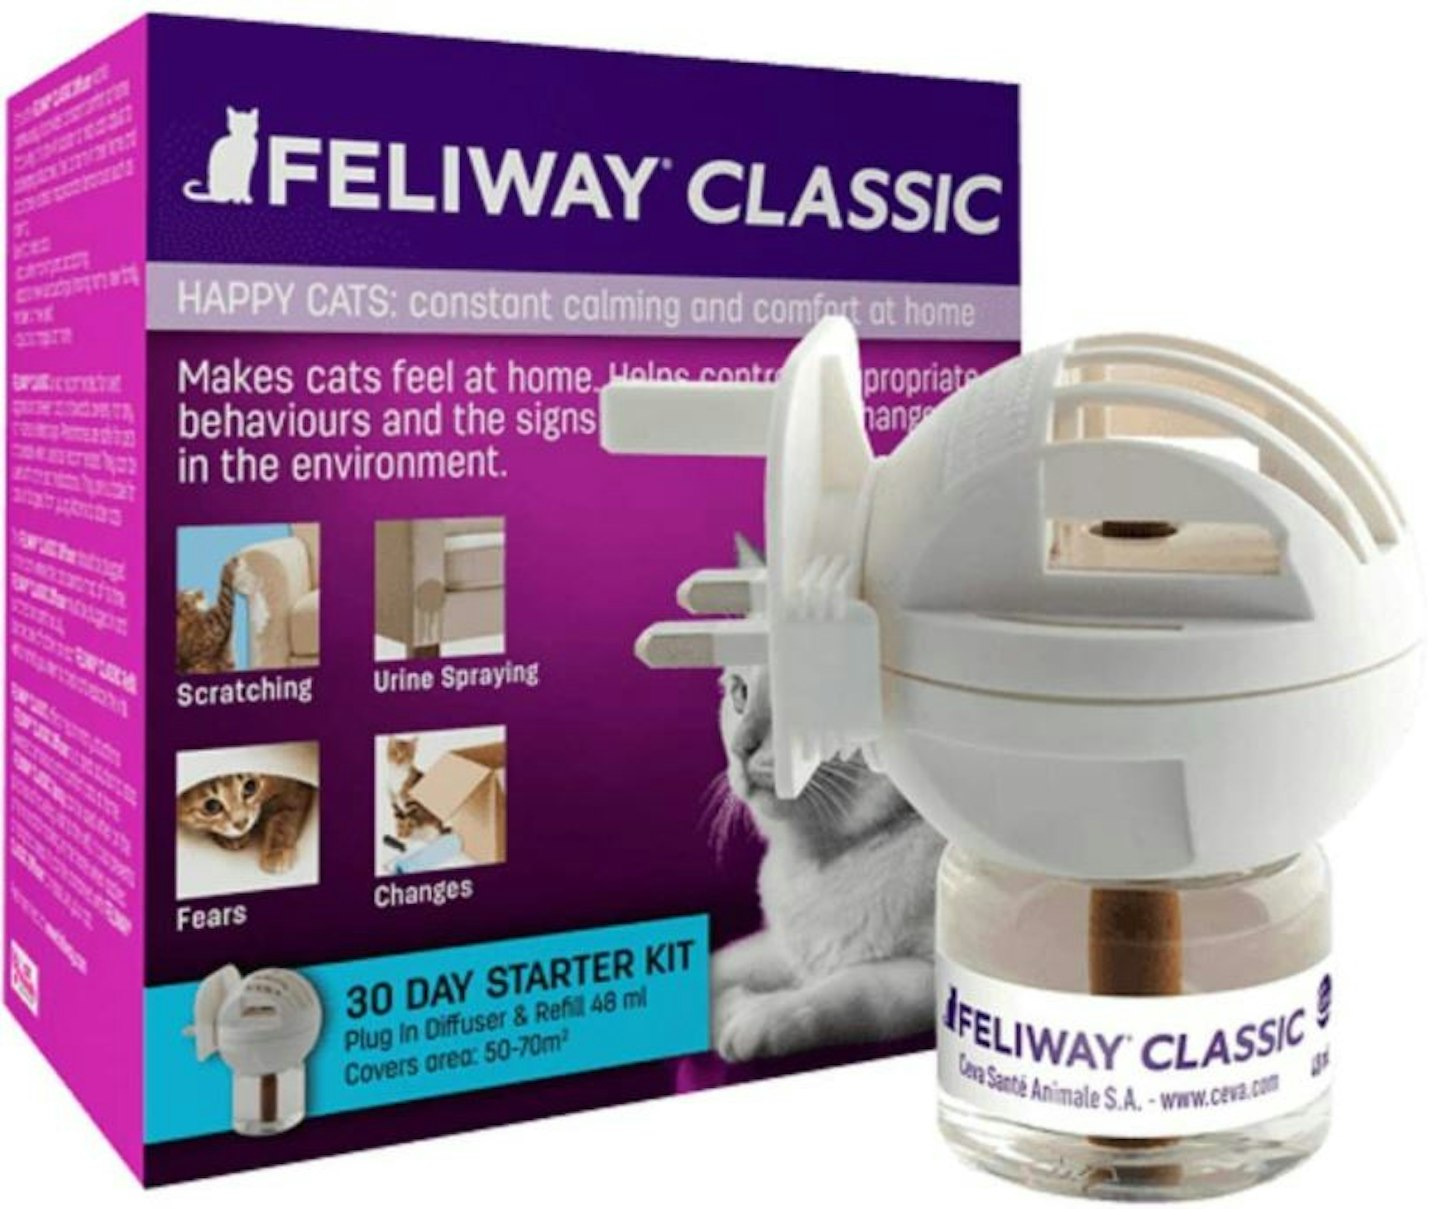 Feliway Classic 30 Day Starter Kit Diffuser and Refill, 48ml